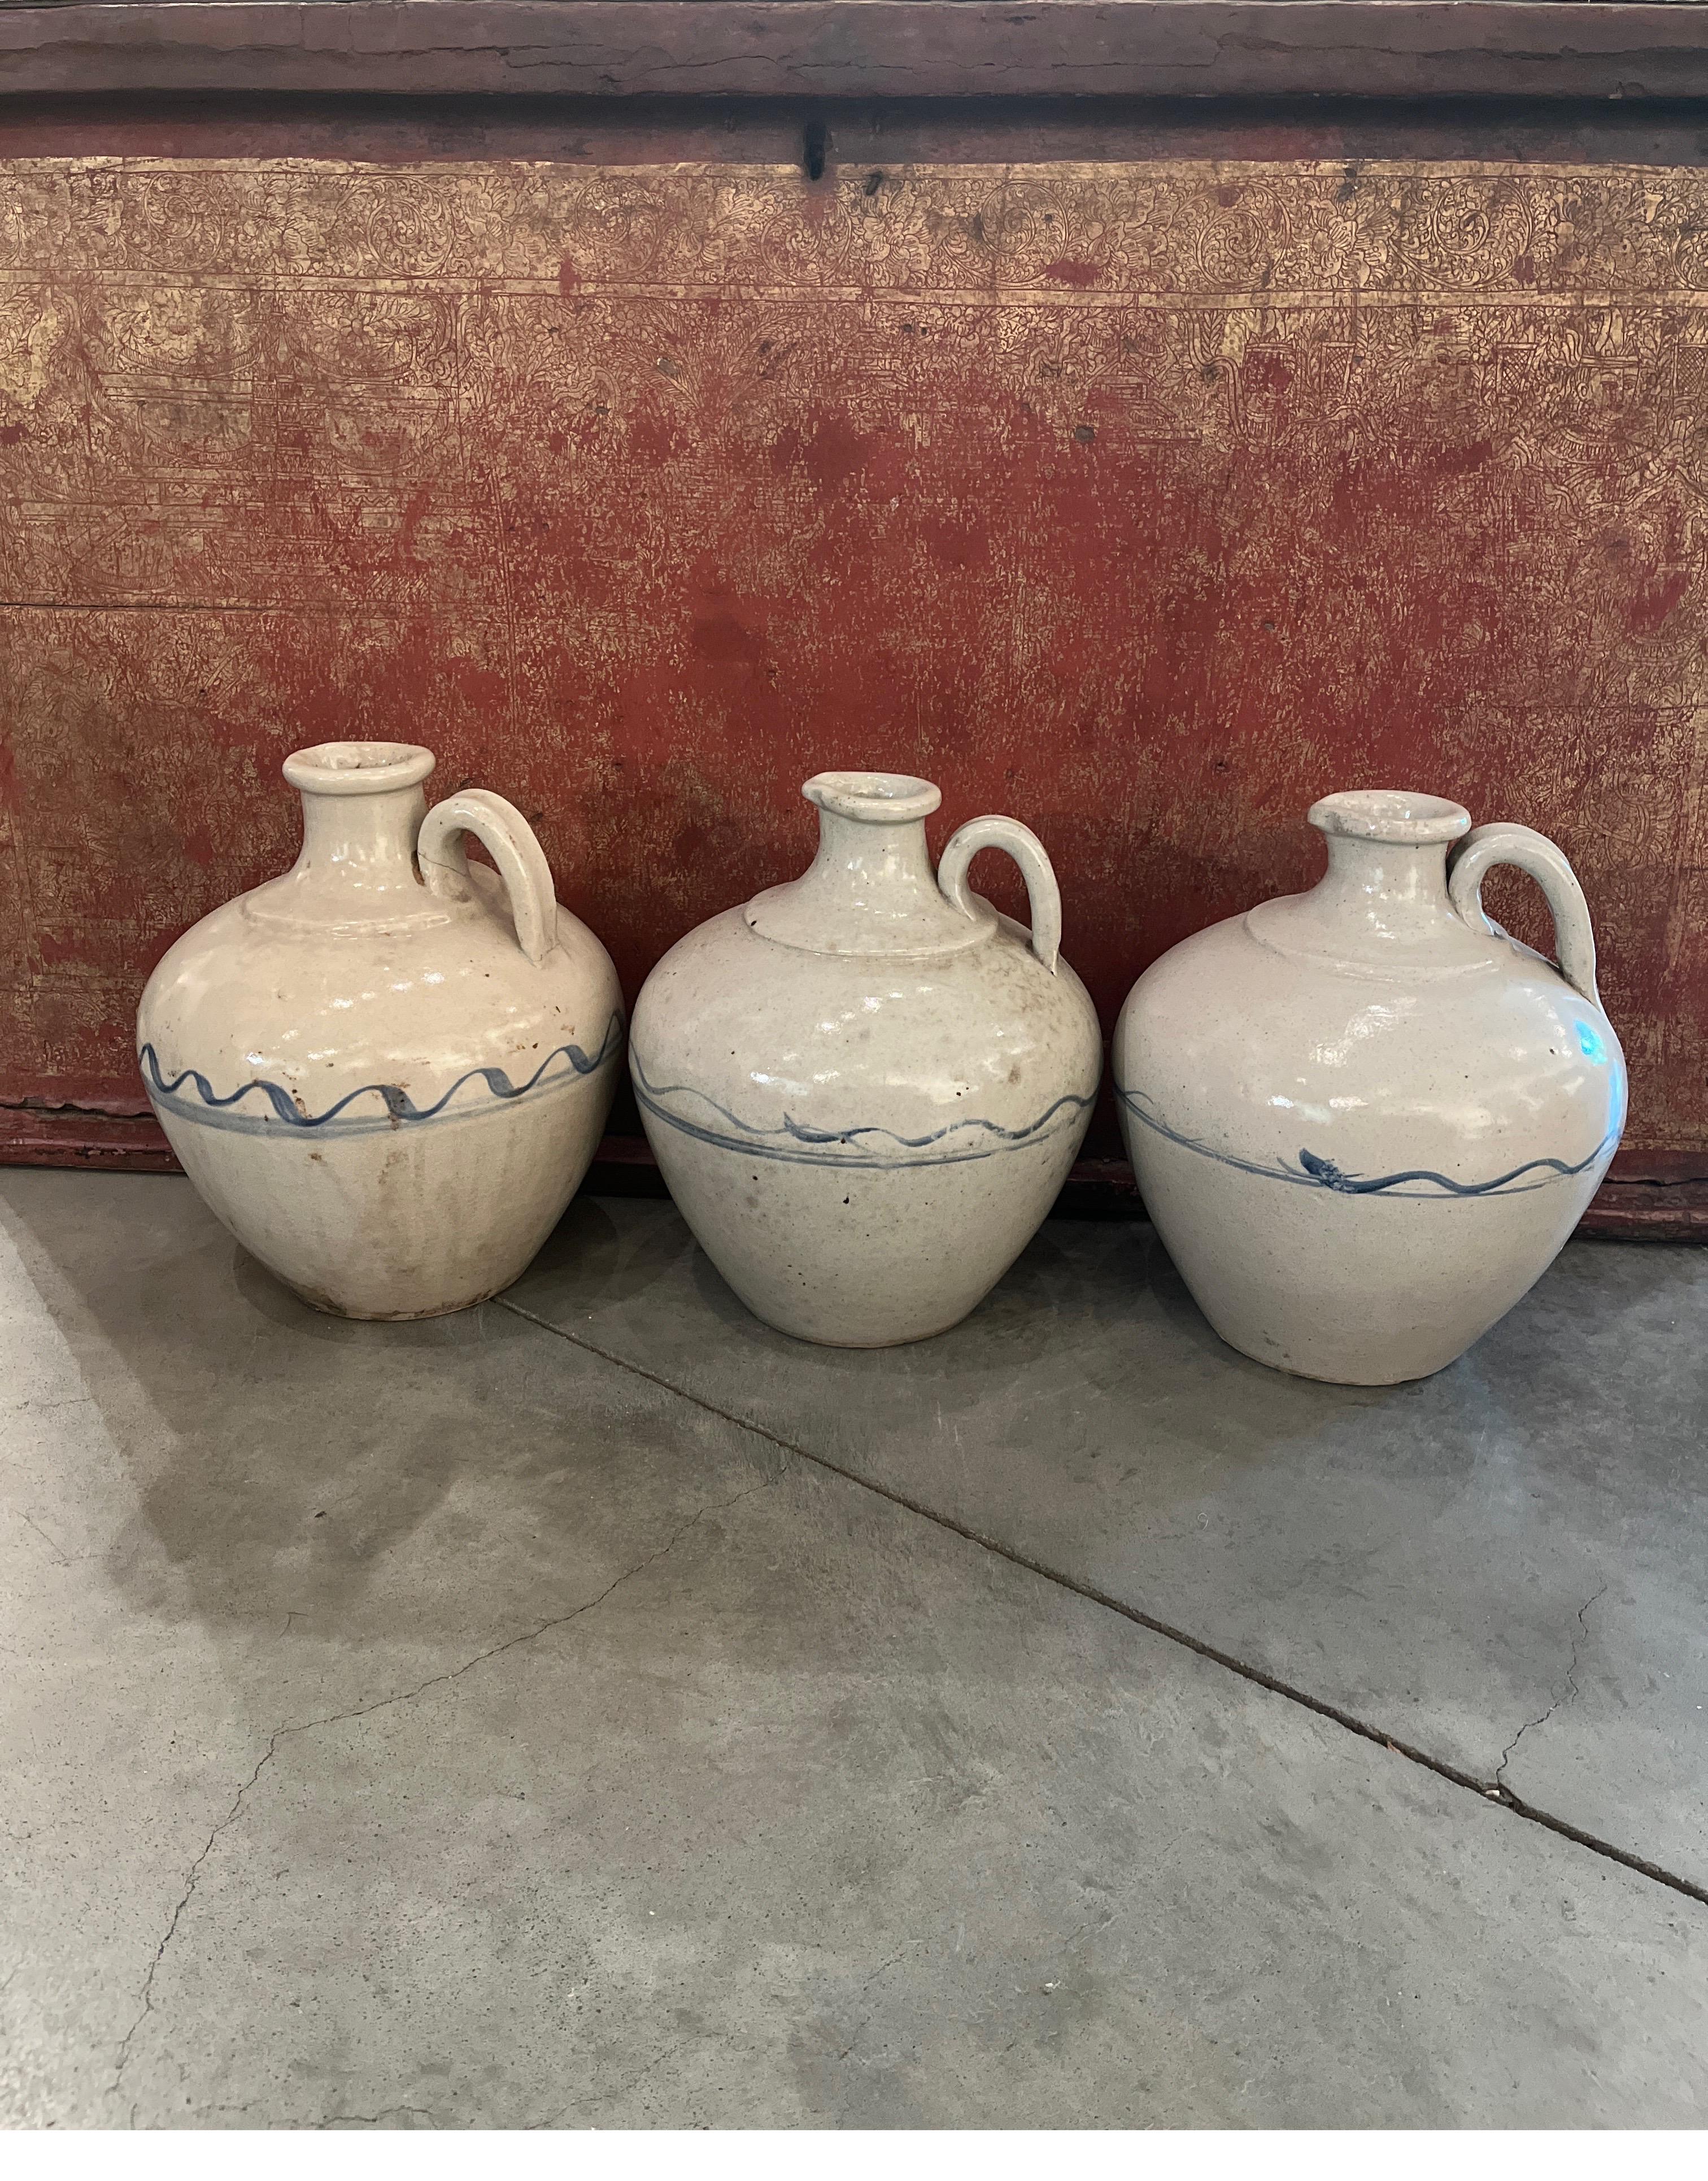 Beautifully glazed and hand painted 19th Century Chinese wine jars with simple blue designs against an eggshell background. These jars (priced and sold individually) look great as a set or on their own. Their light color, and the very